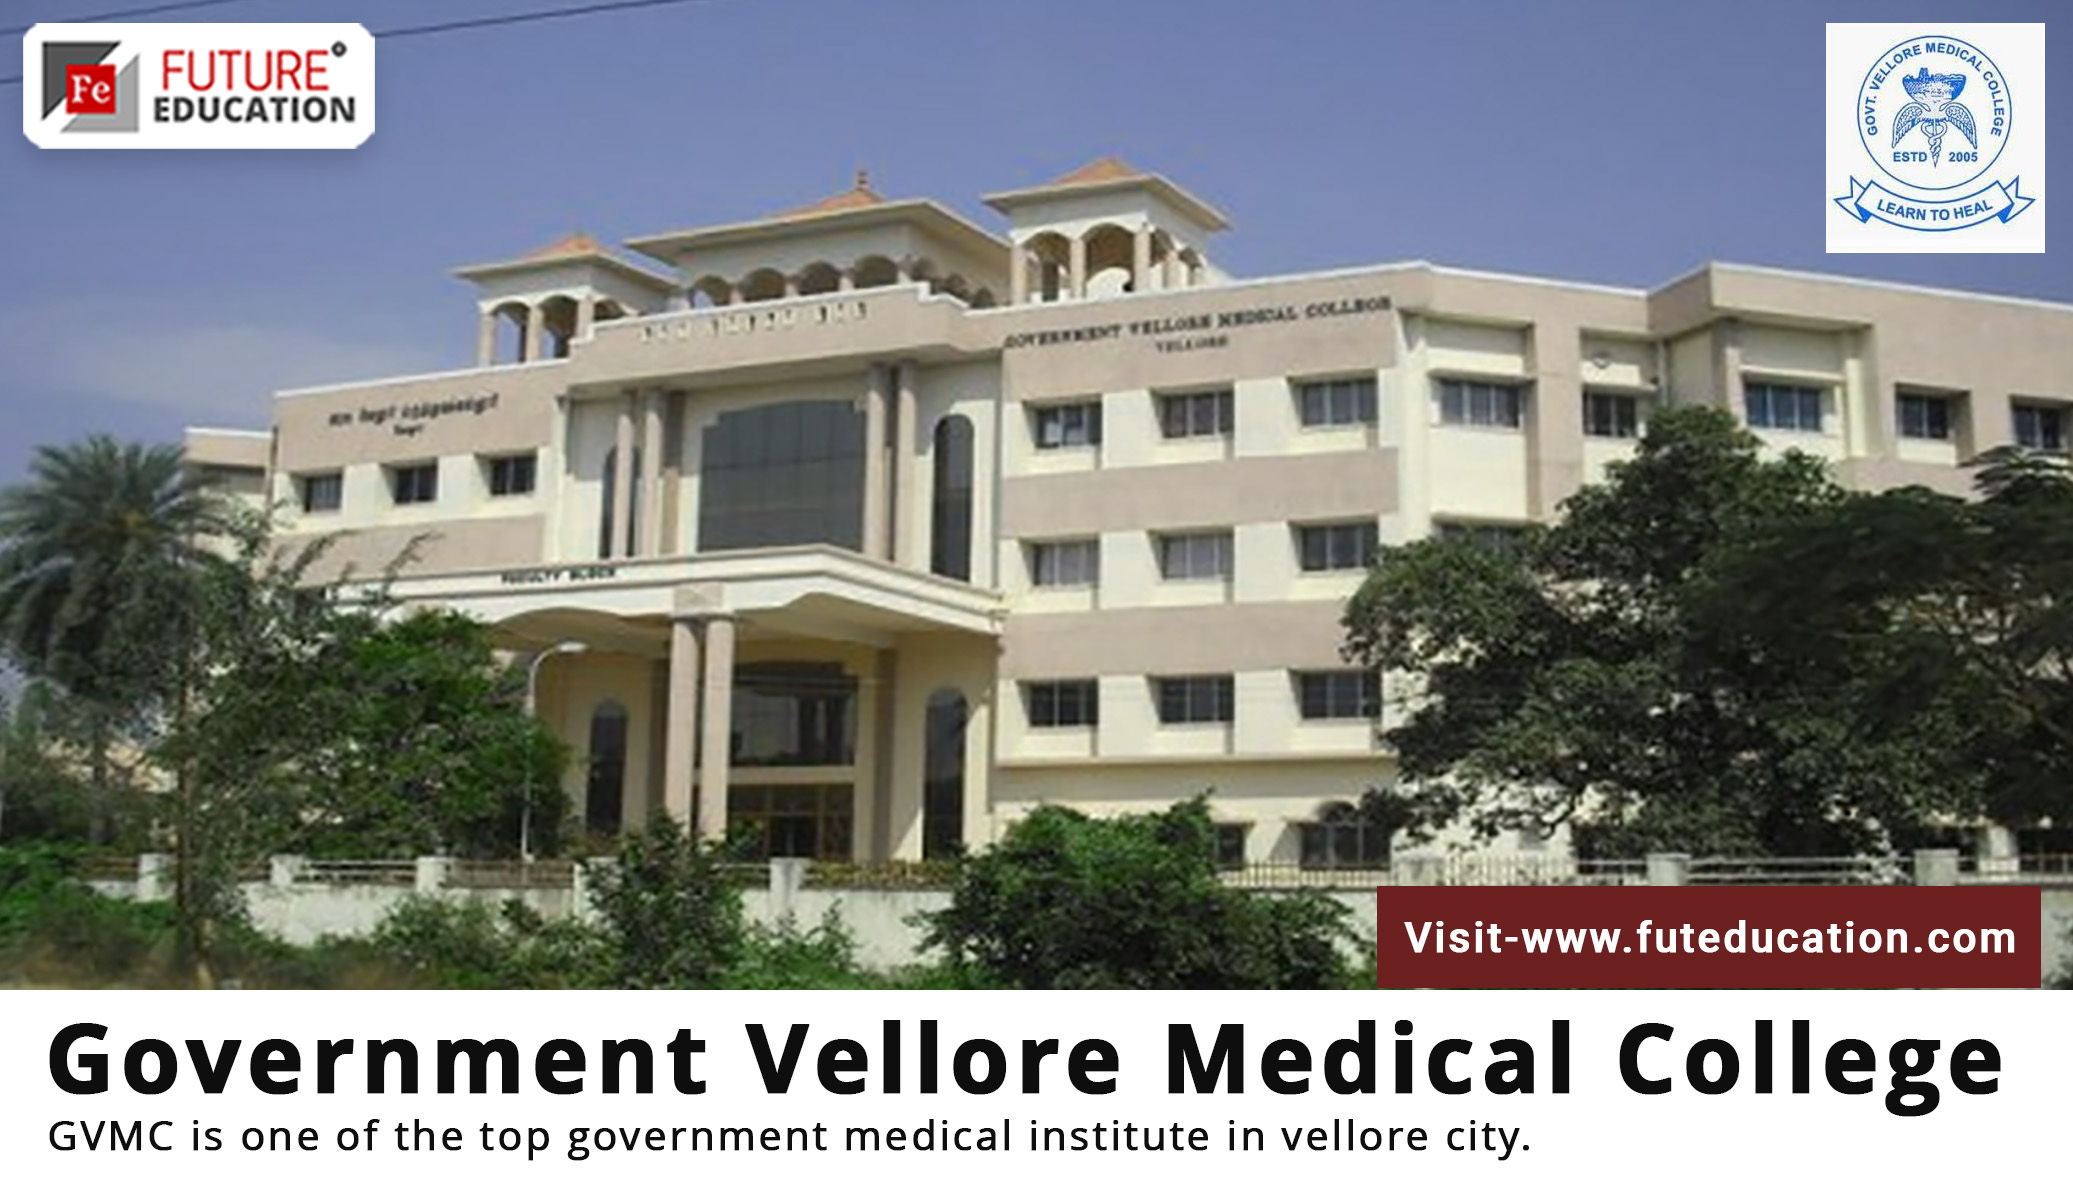 GVMC Vellore MBBS Admissions, PG Courses, Seat details, and Fees